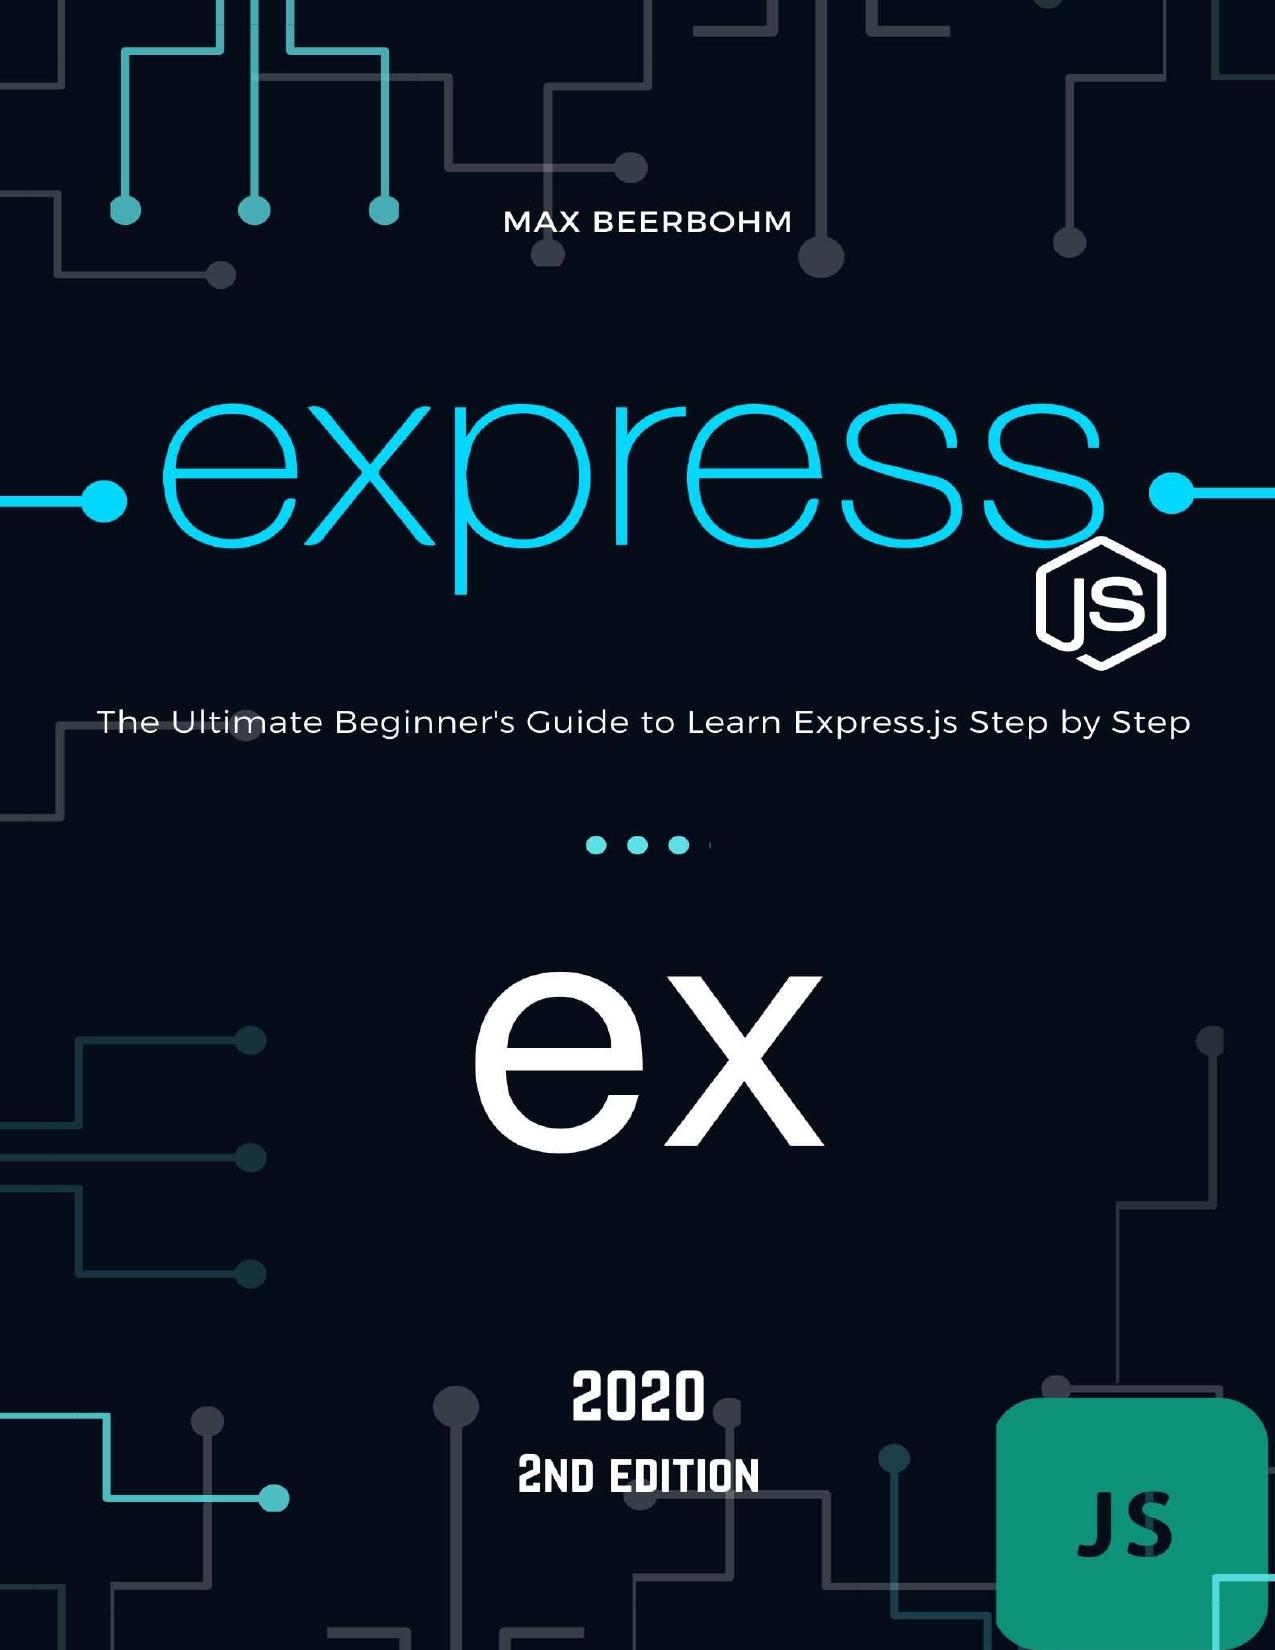 Express.js: The Ultimate Beginner's Guide to Learn Express.js Step by Step - 2020 (2st Edition)